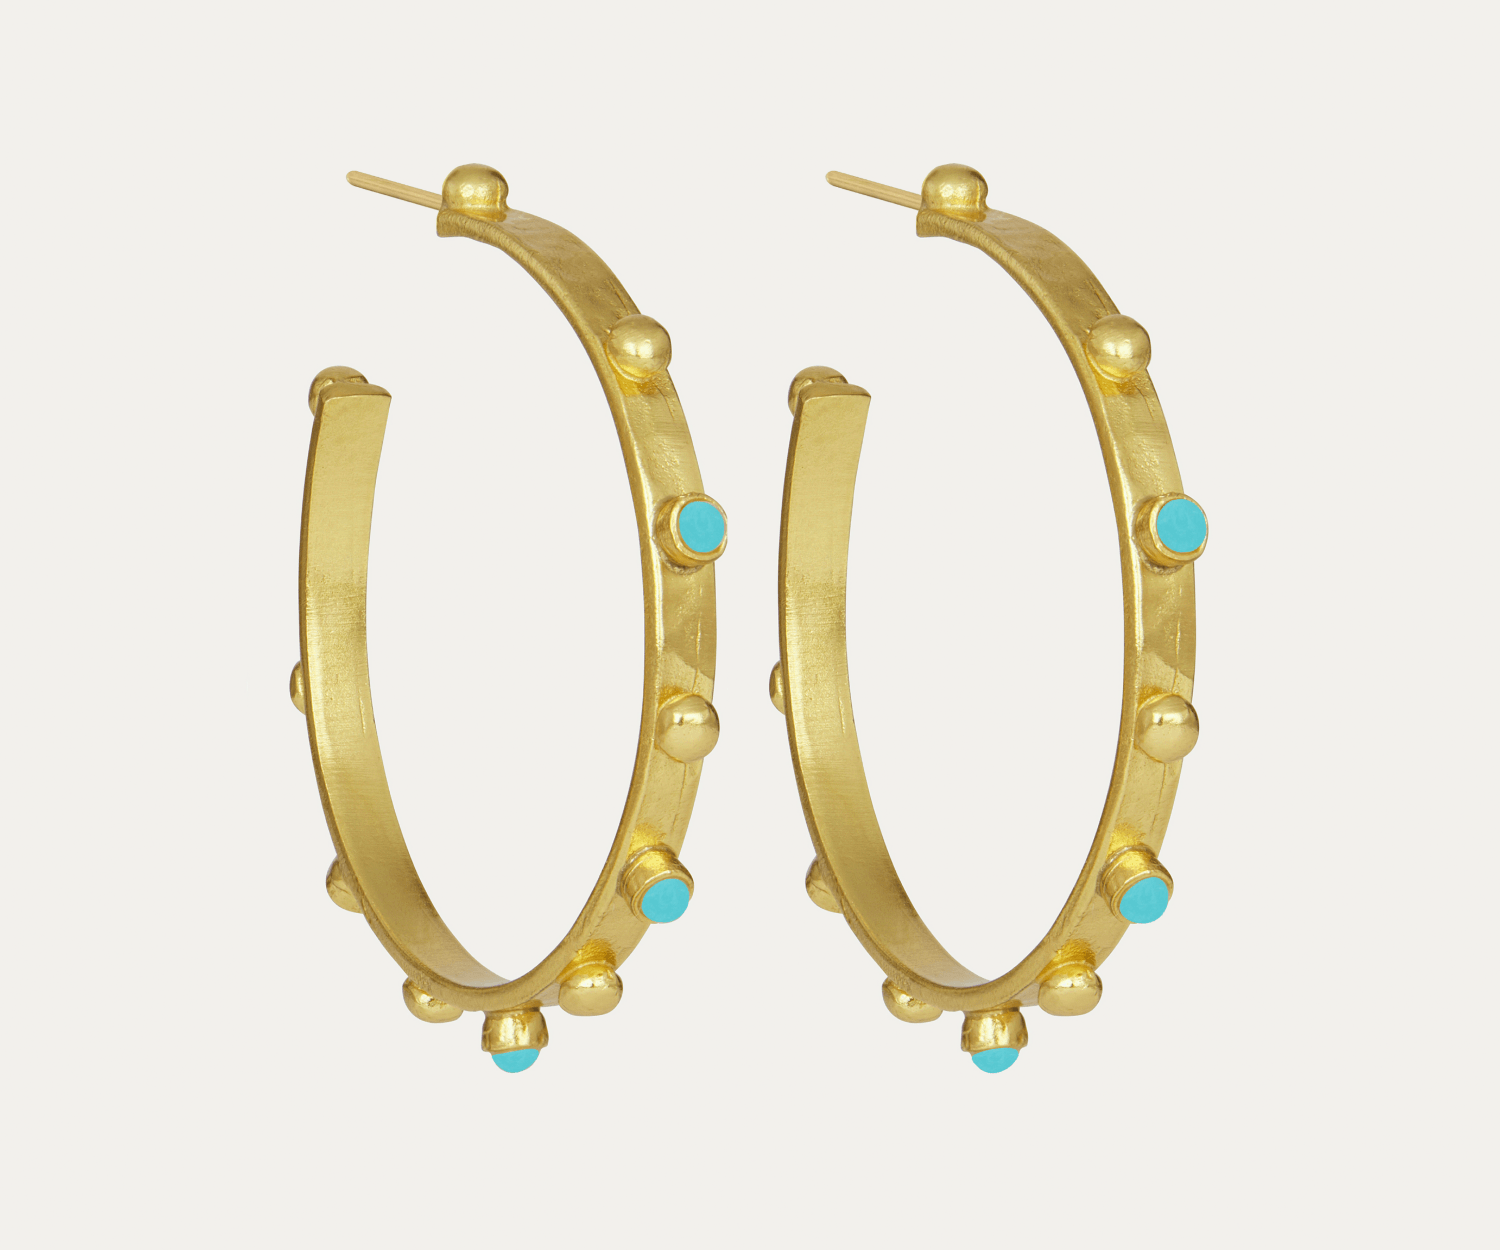 Tanrica Large Hoop Earrings with Turquoise Beads | Sustainable Jewellery by Ottoman Hands